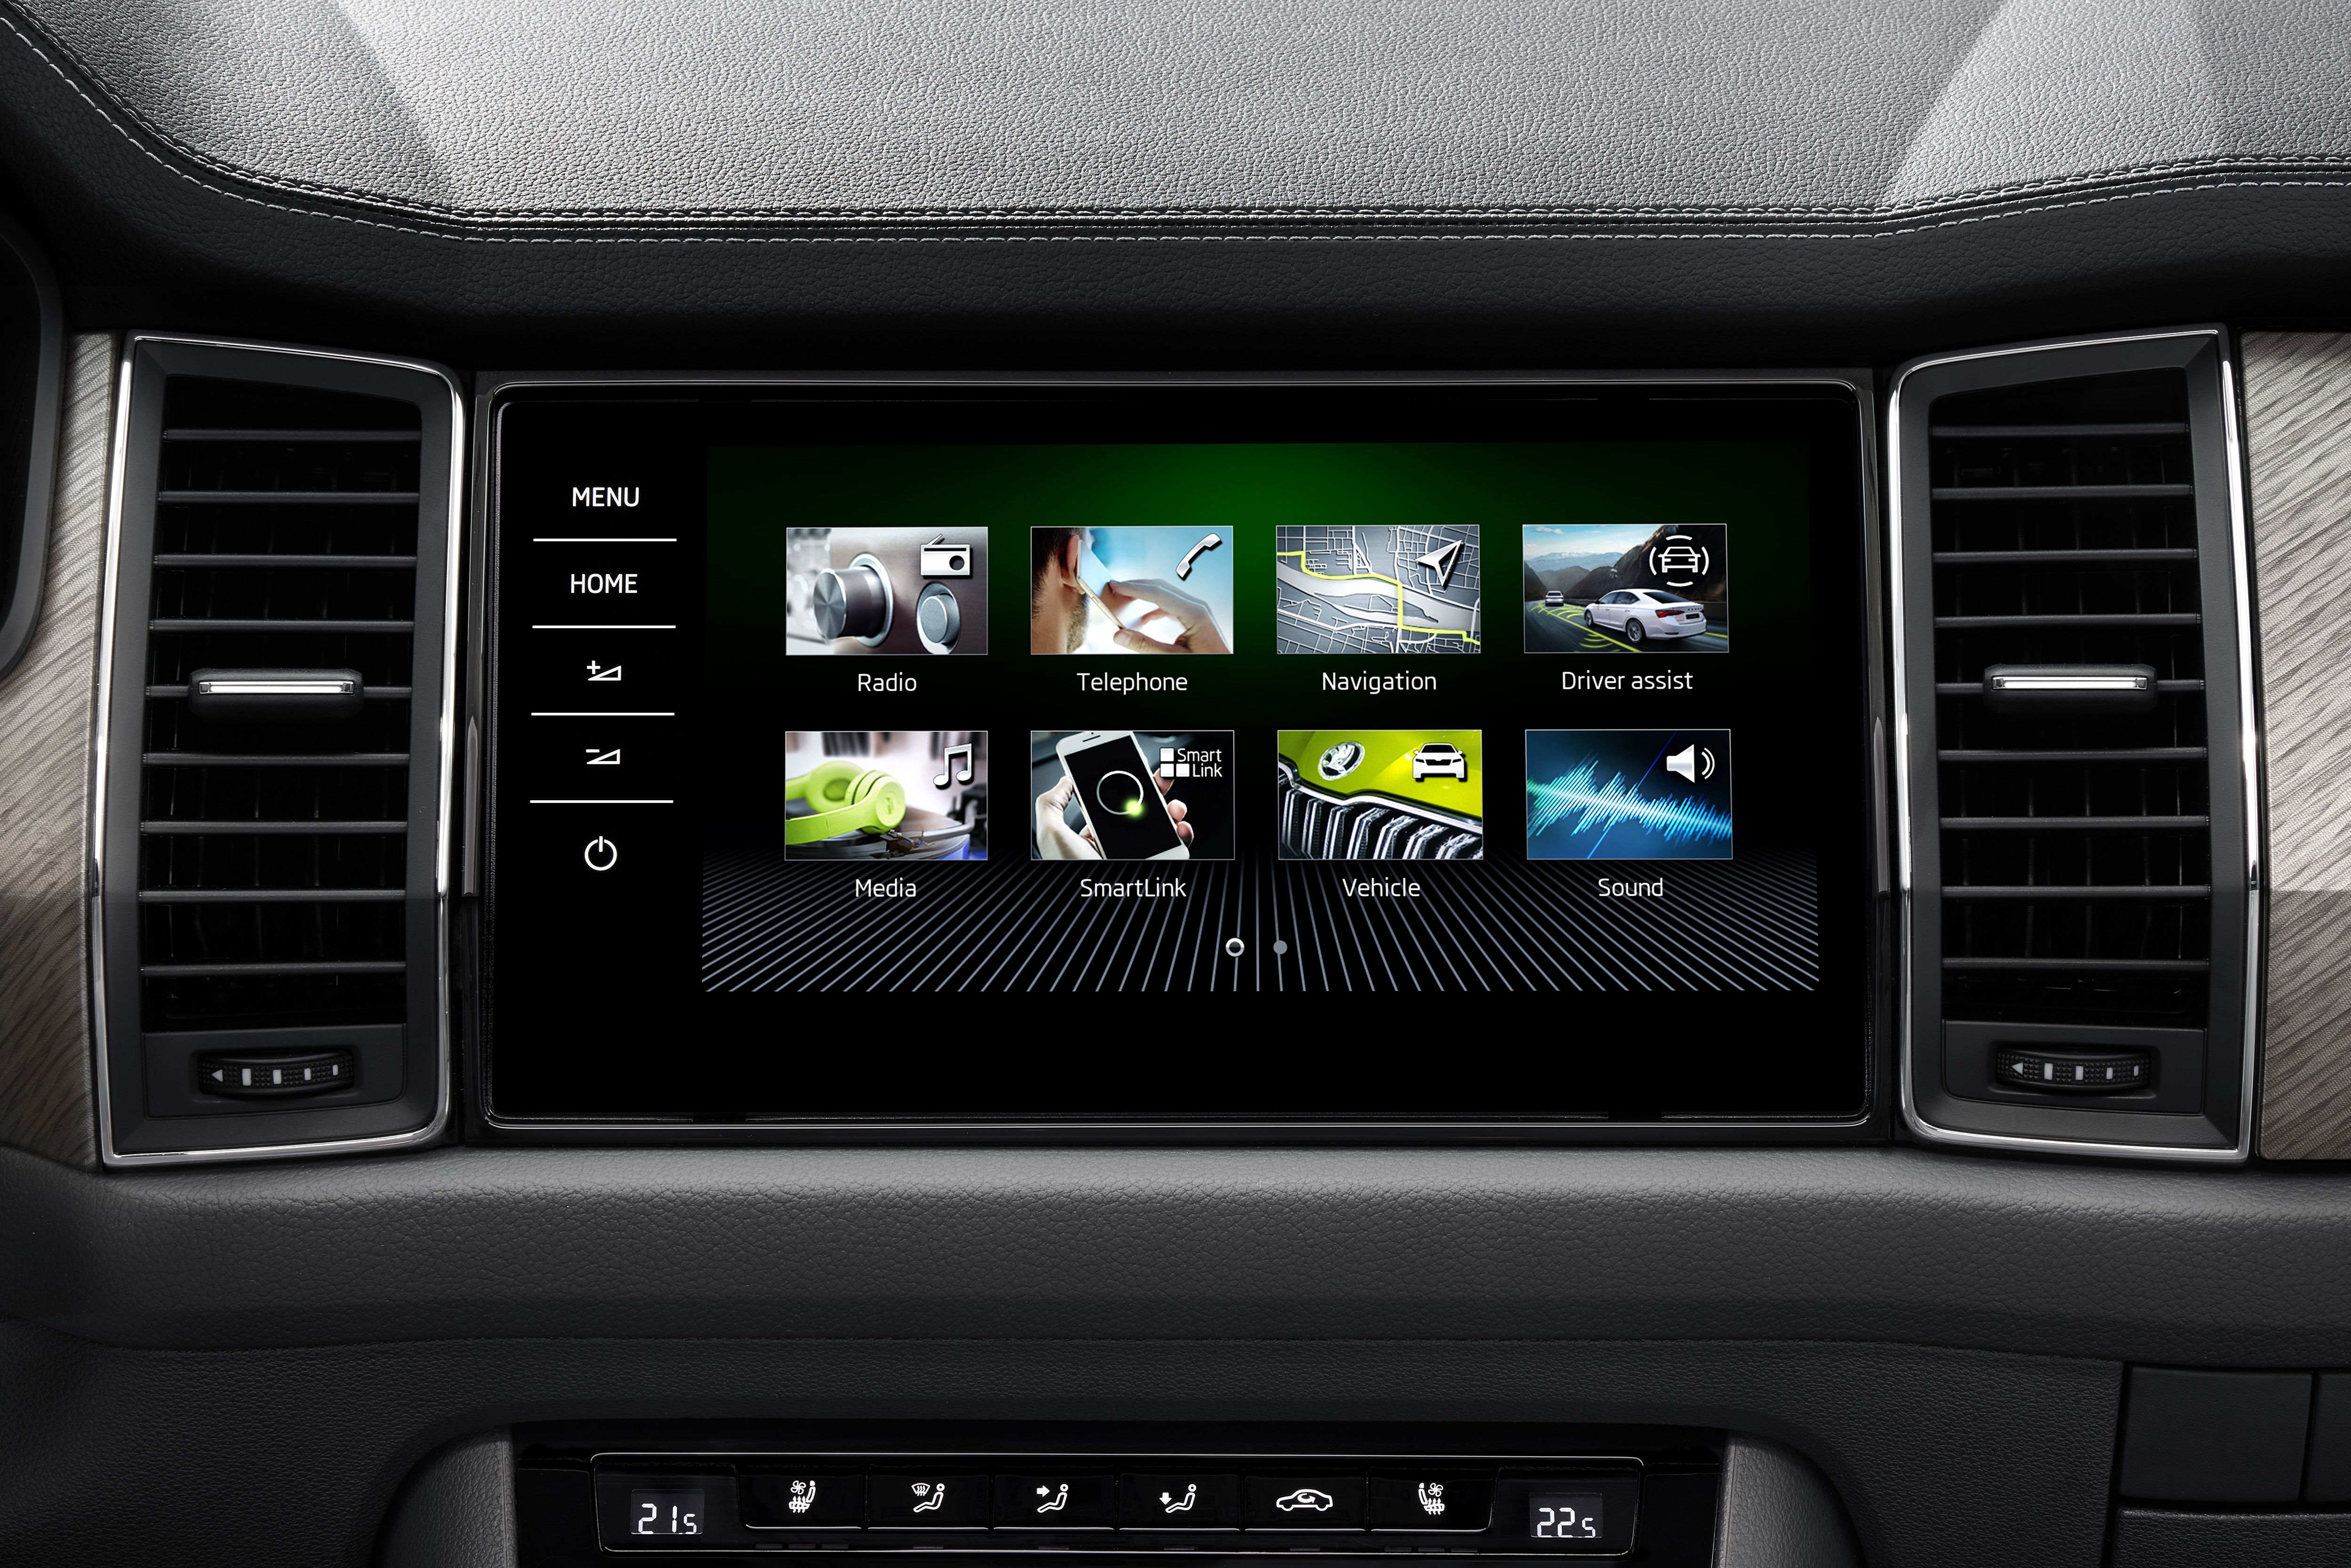 The new infotainment system in the facelifted Kodiaq